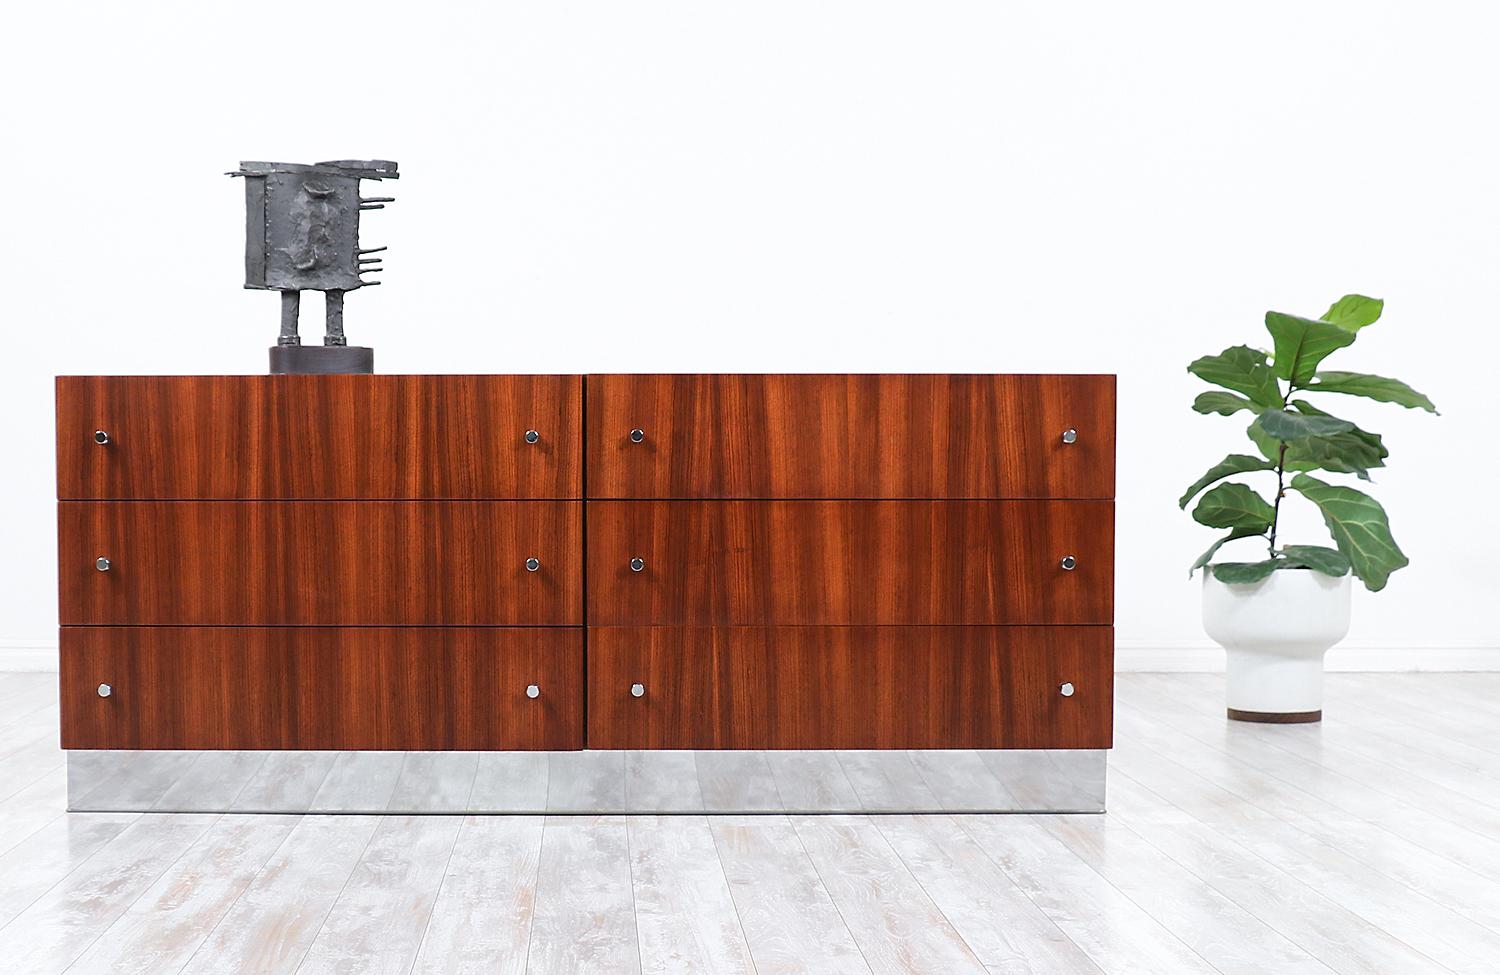 Milo Baughman rosewood & chrome dresser for Thayer Coggin.

________________________________________

Transforming a piece of Mid-Century Modern furniture is like bringing history back to life, and we take this journey with passion and precision.